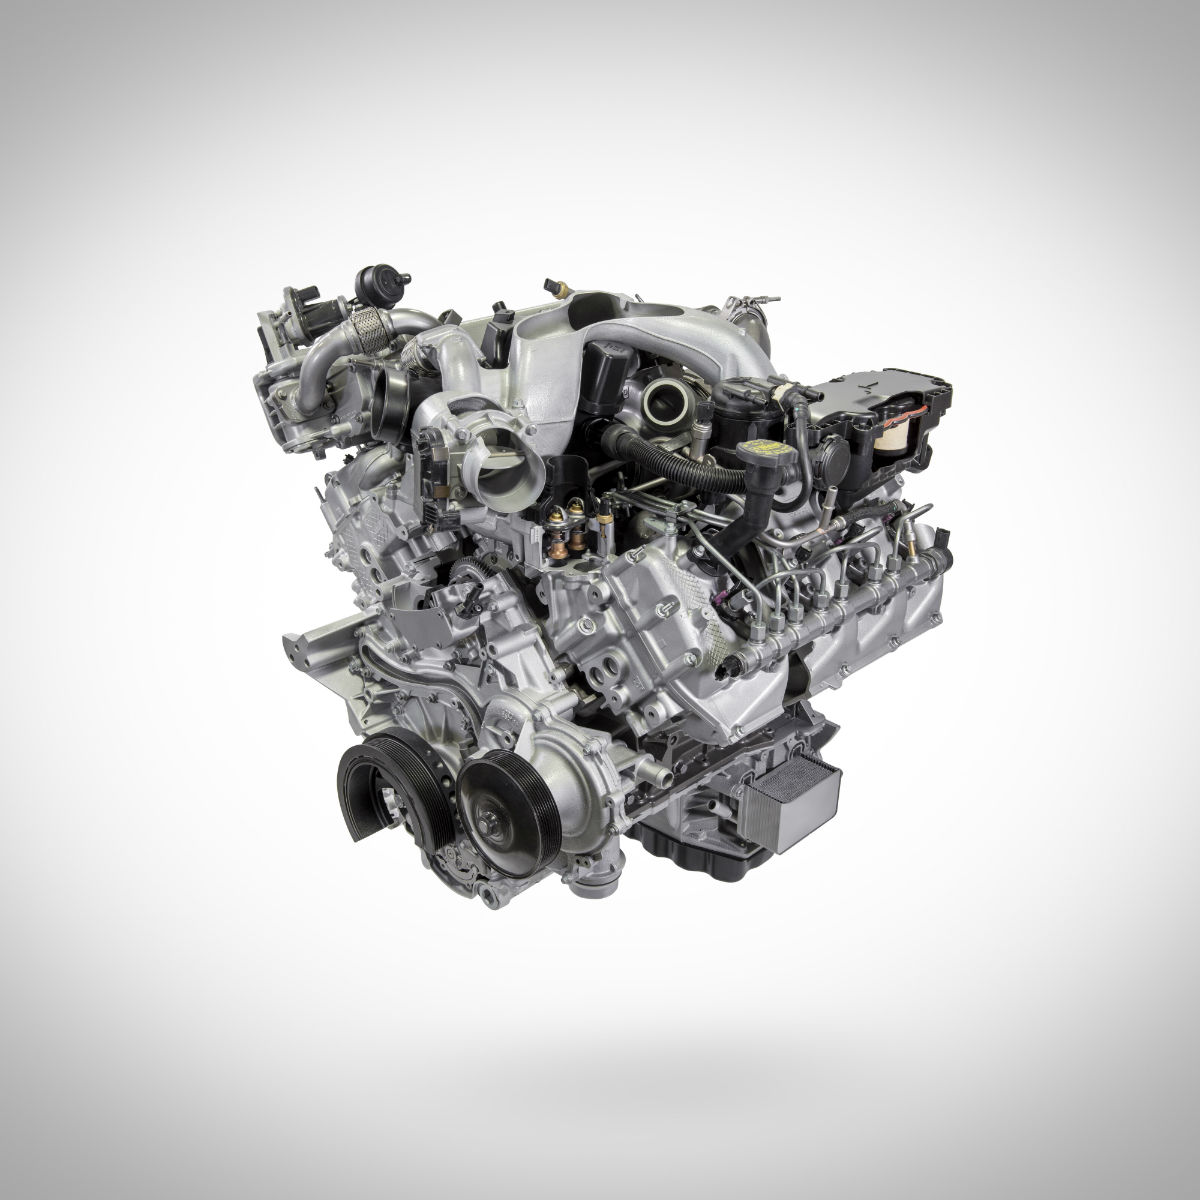 Diesel engine in a 2020 Ford Super Duty